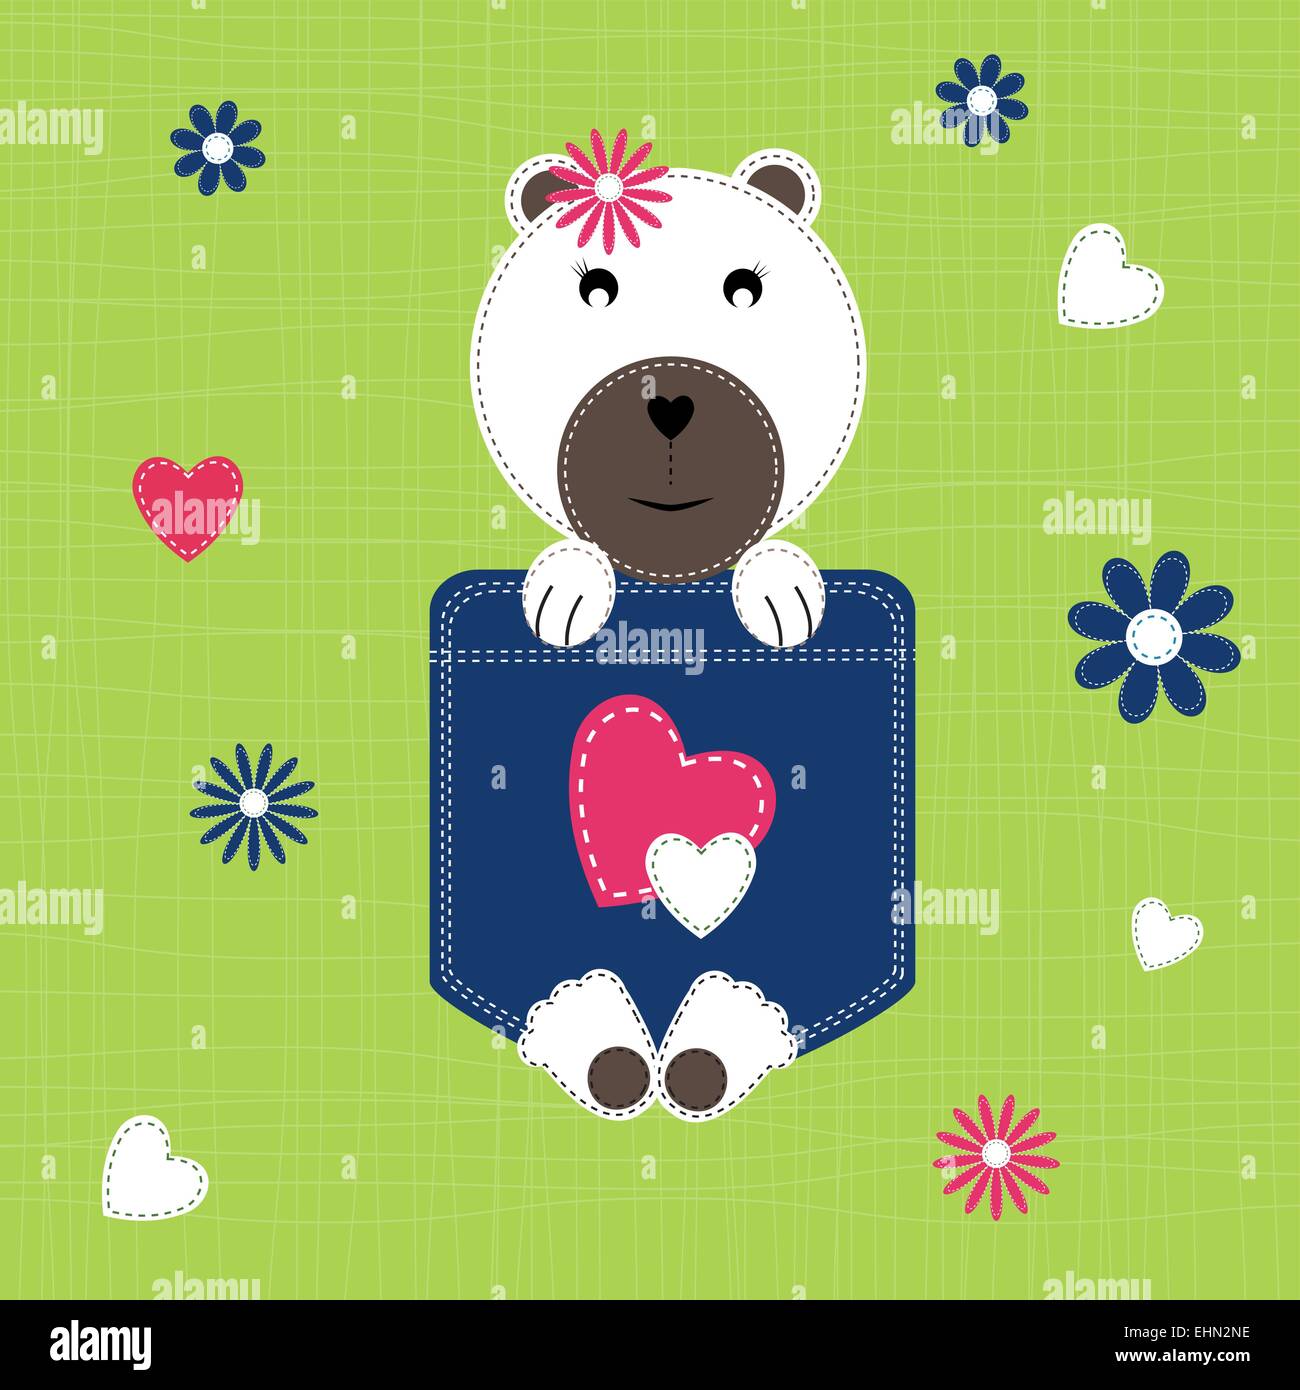 Cute and sweet baby card on birthday or shower Stock Vector